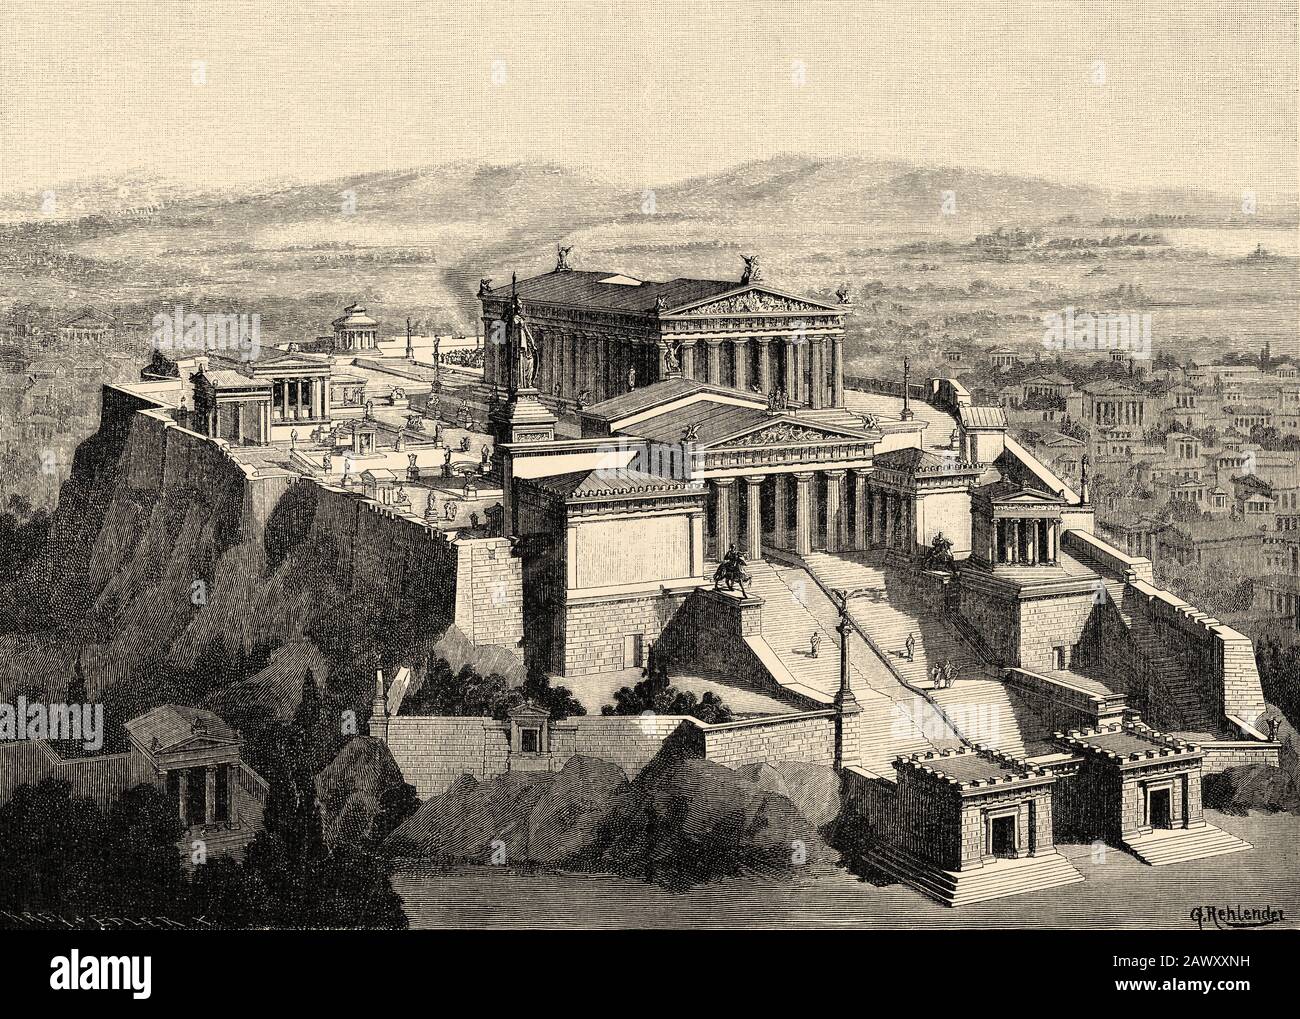 The propileos were the great entrance to the Acropolis of Athens. Greece ancient history. Old engraving illustration from the book Universal history b Stock Photo